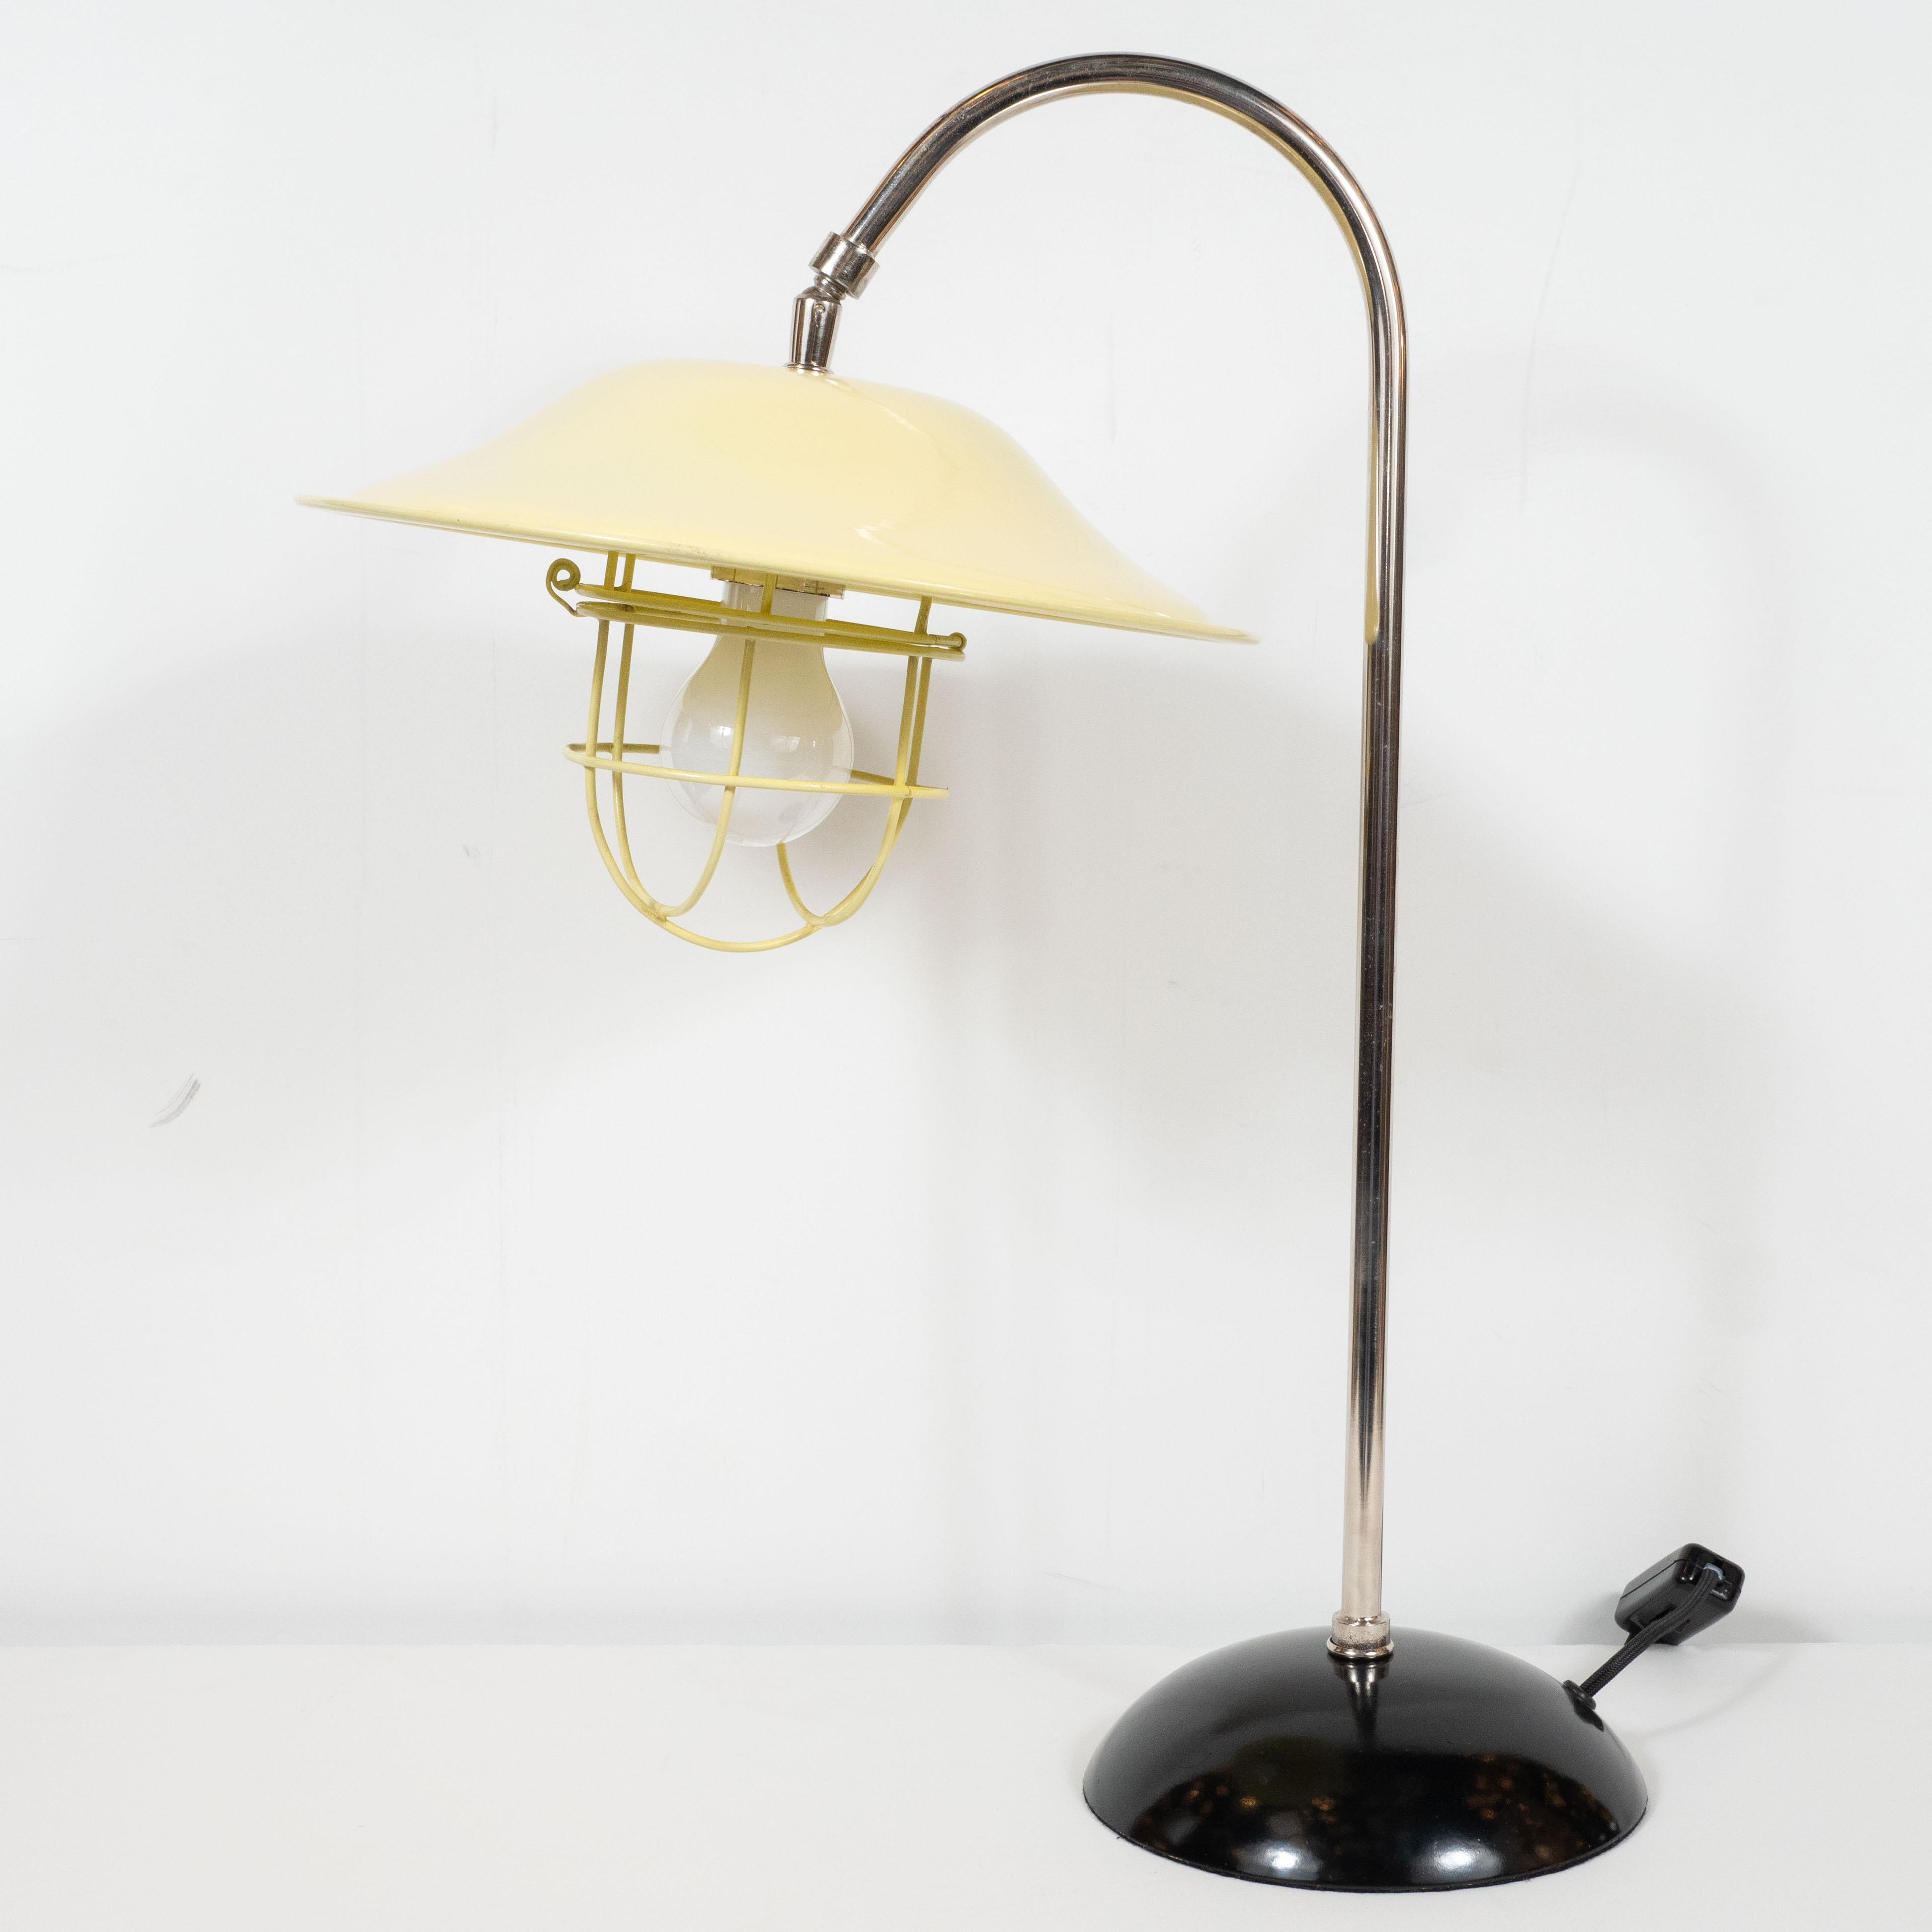 French Mid-Century Modern Chrome and Lemon Cream and Black Enamel Table Lamp For Sale 4